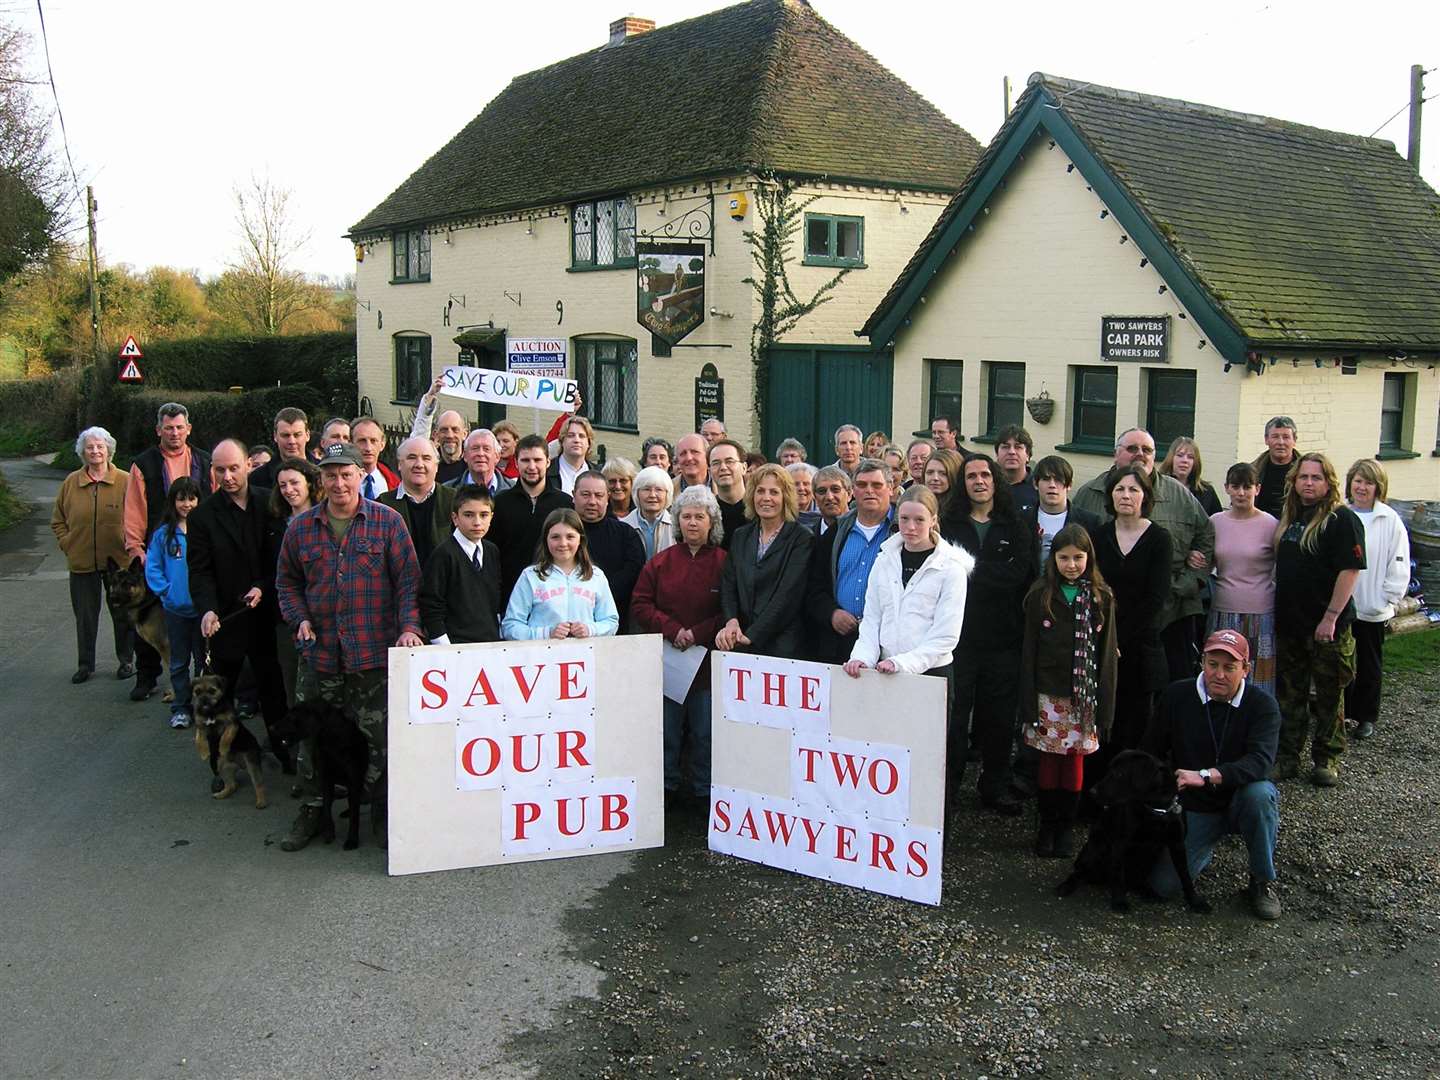 Villagers at Woolage Green, near Canterbury, were campaigning in March 2005 to stop The Two Sawyers from being turned into a house. They were victorious and the pub is still going today